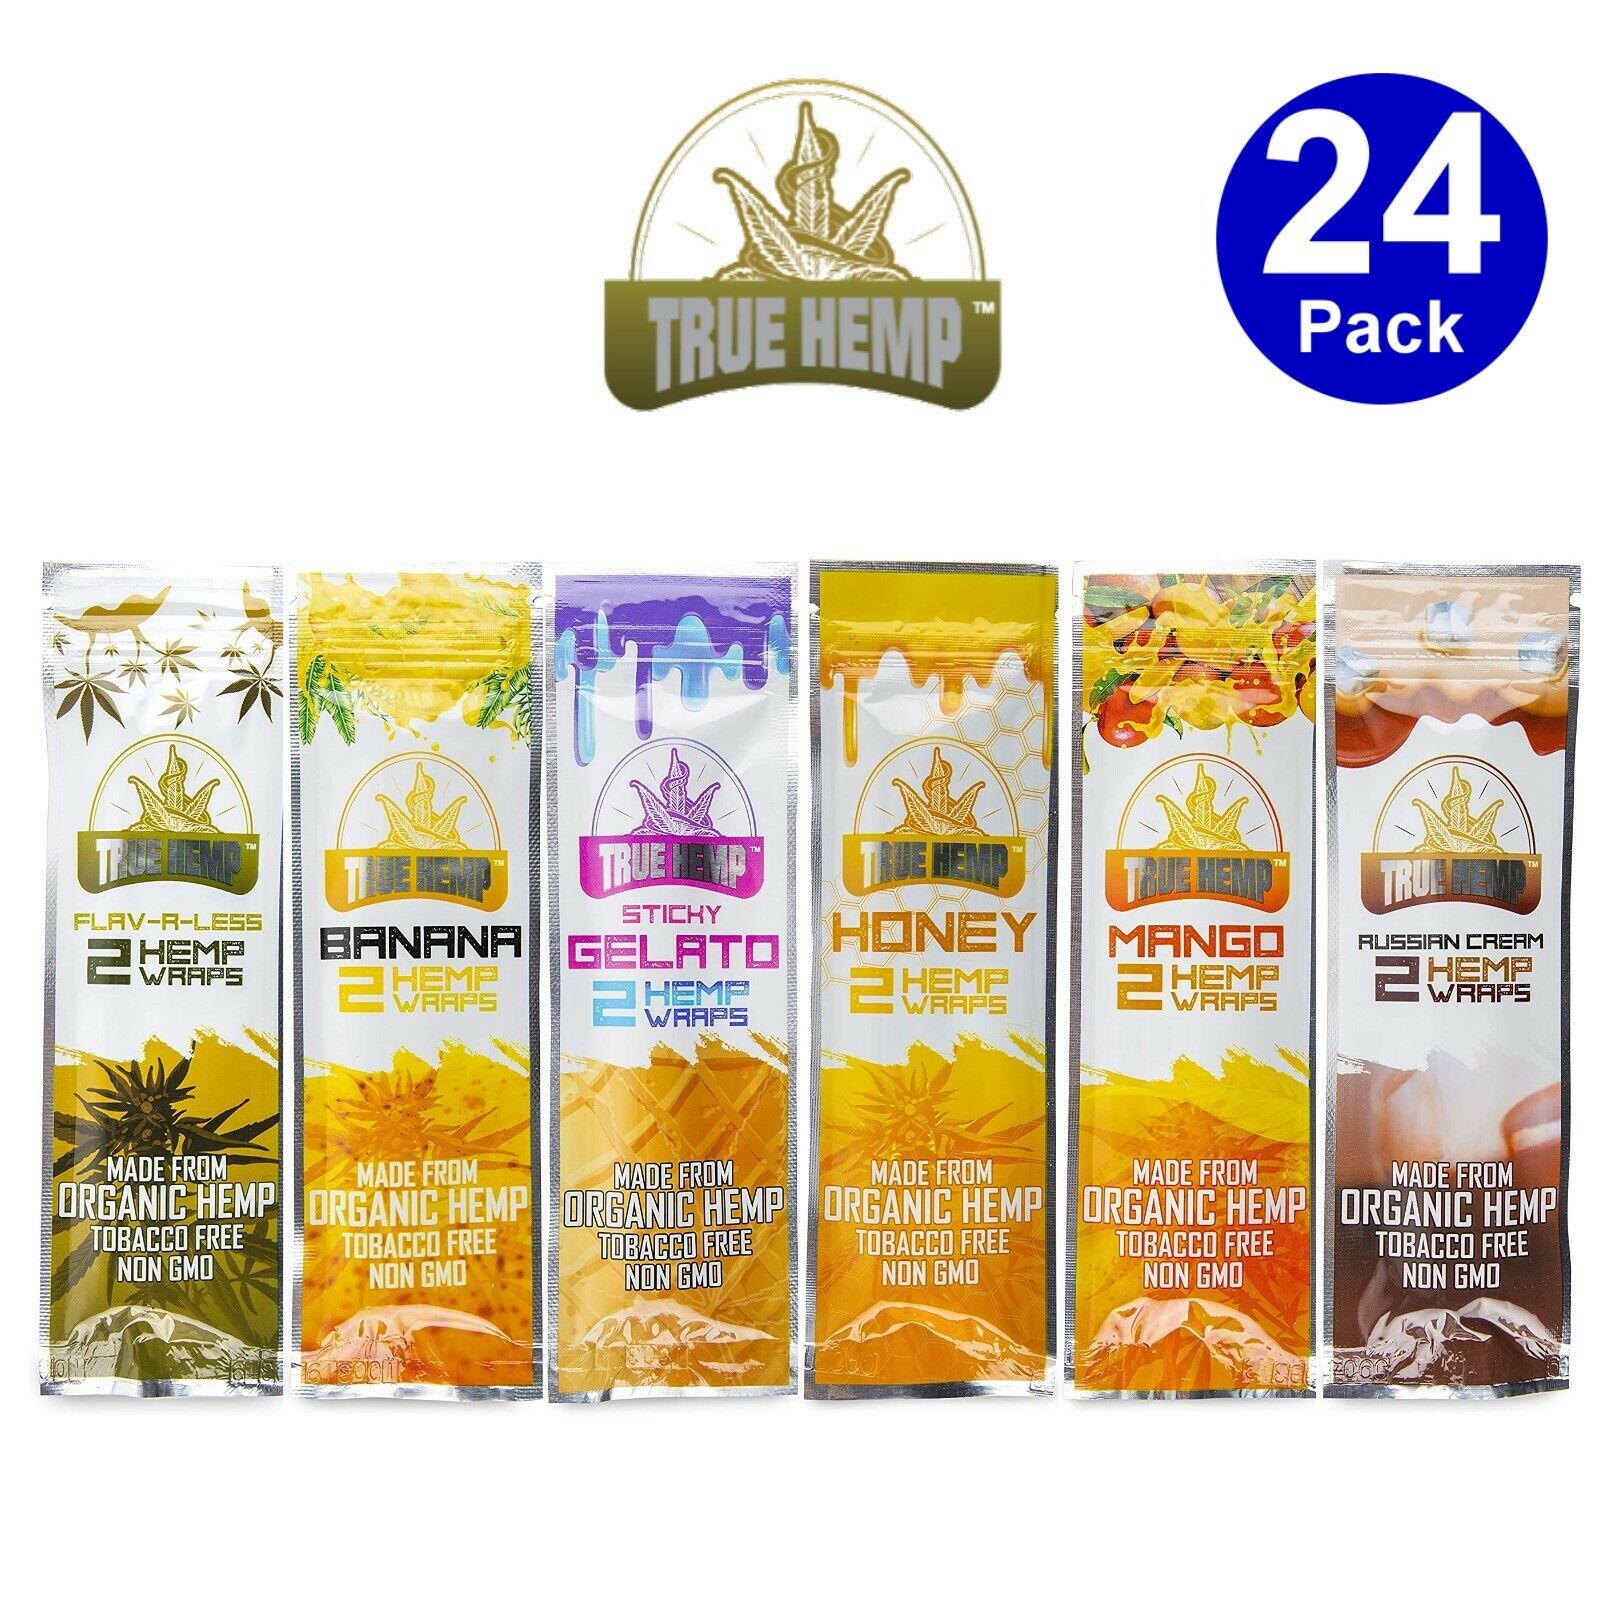 TRUE H. Organic Wrap Variety Pack 24 Pouches, 2 Per Pouch - 48 Wraps Total